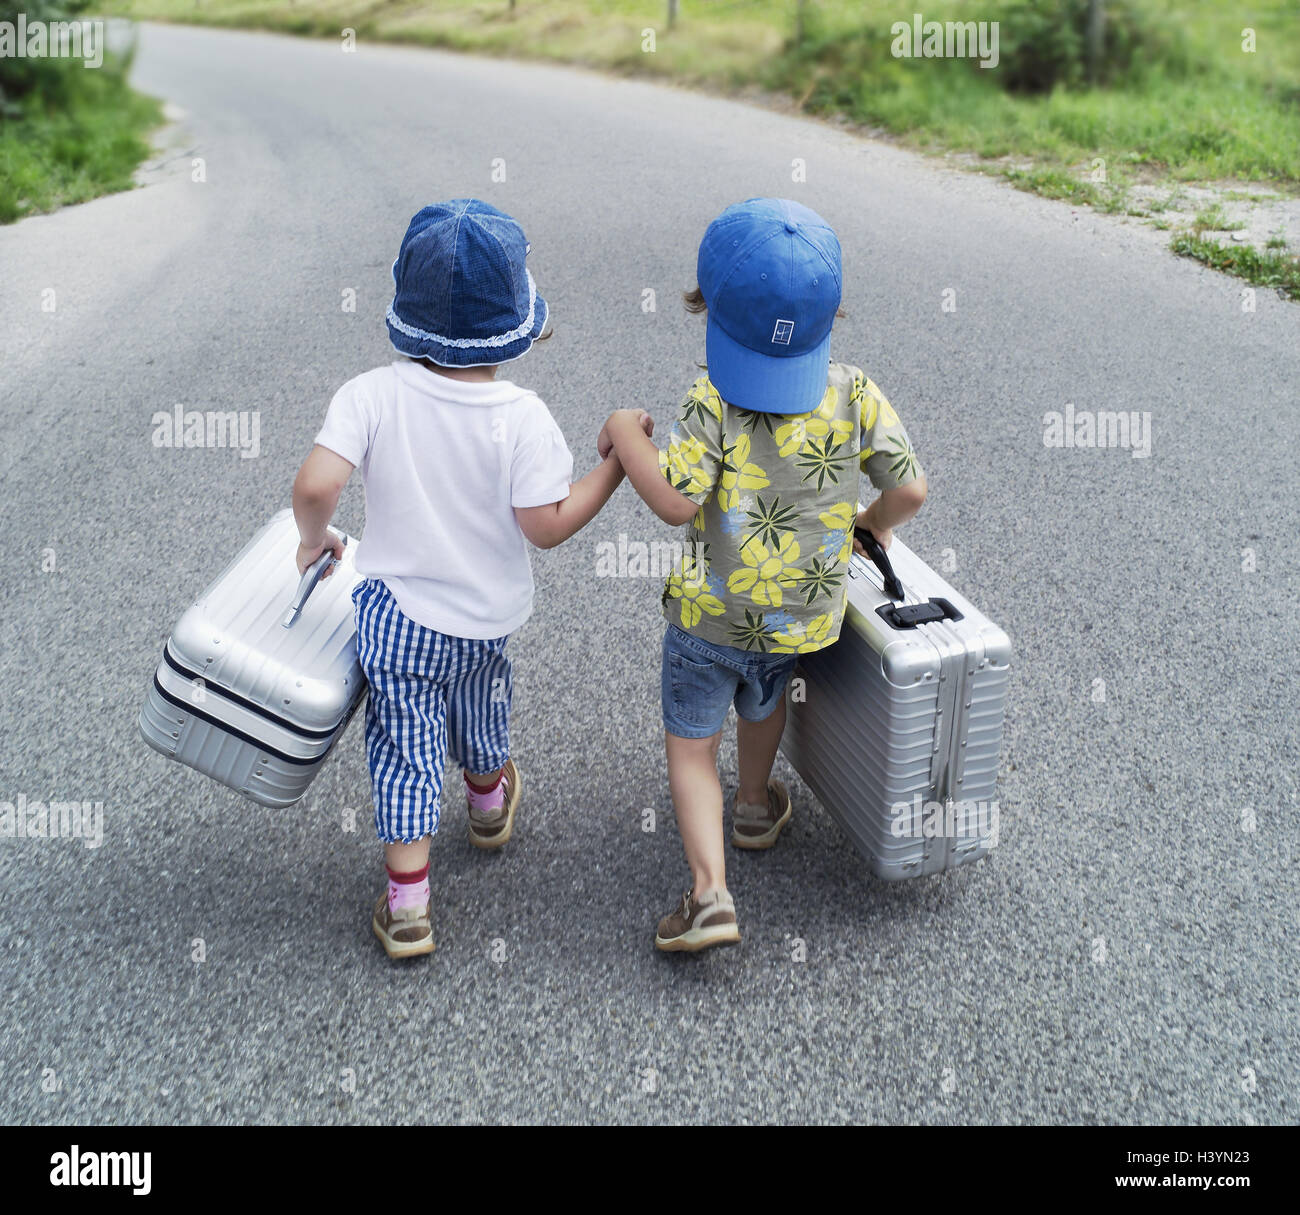 Roadside, infants, suitcases, hand in hand, run away, hold back view children, siblings, sisters, 3 years, friends, friendship, childhood, hands, luggage, outlier, break away, ausbüchsen, go, there run away, together, together, cohesion, unattended, indep Stock Photo